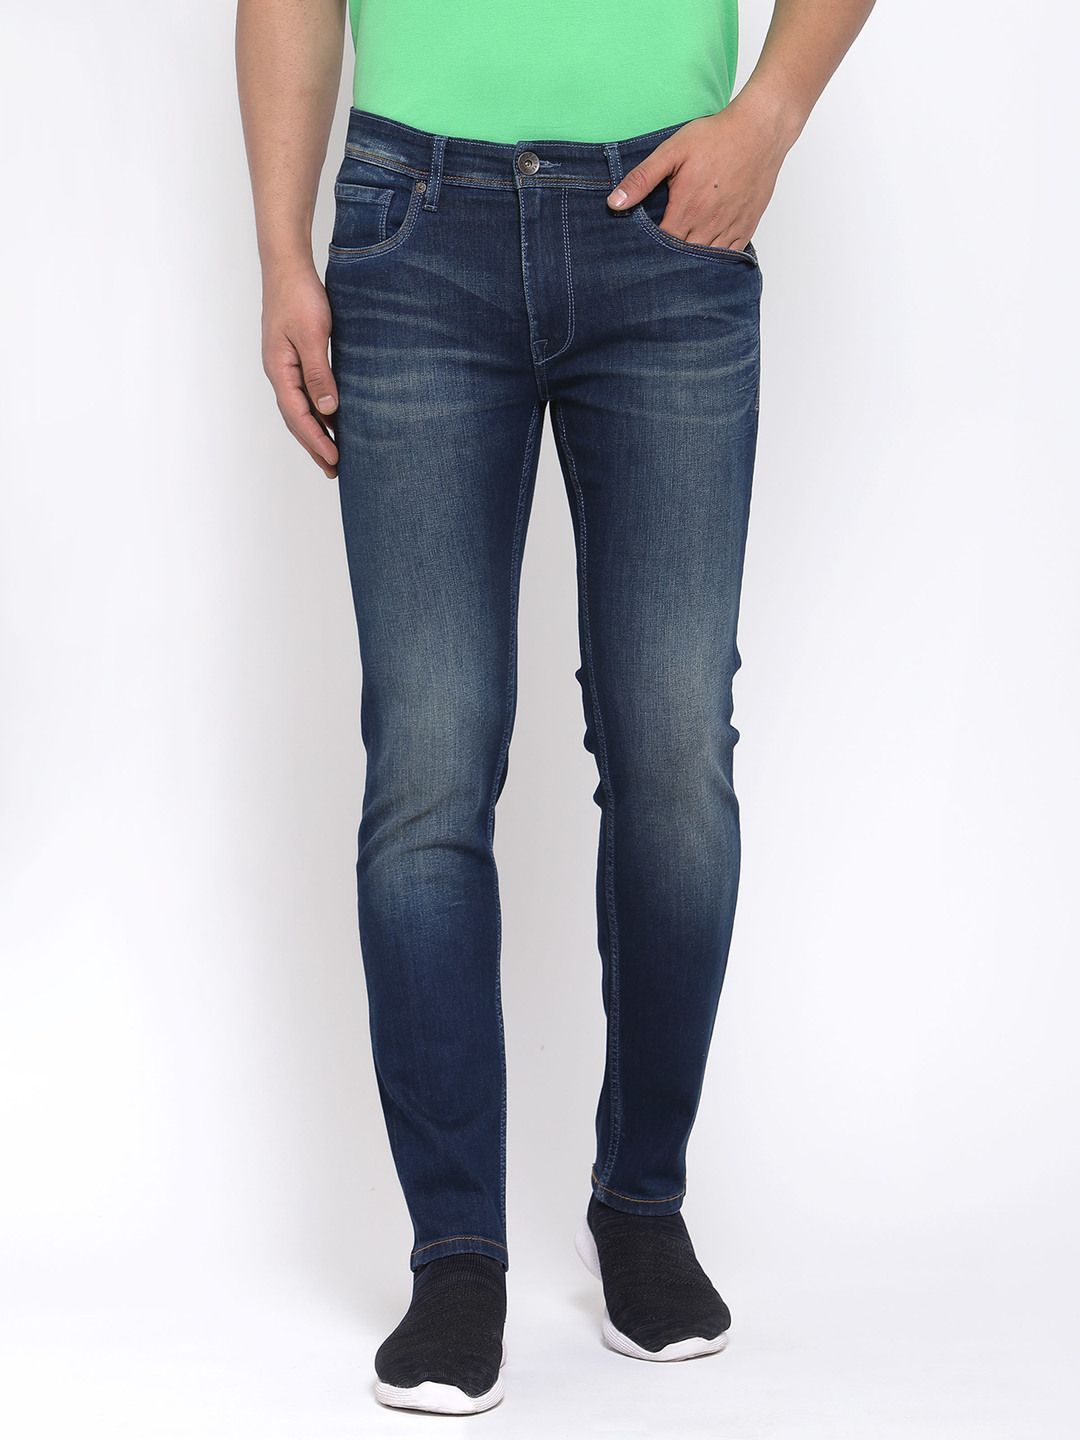 Pepe Jeans Women Blue Slim Fit Low-Rise Light Fade Stretchable Jeans Price in India